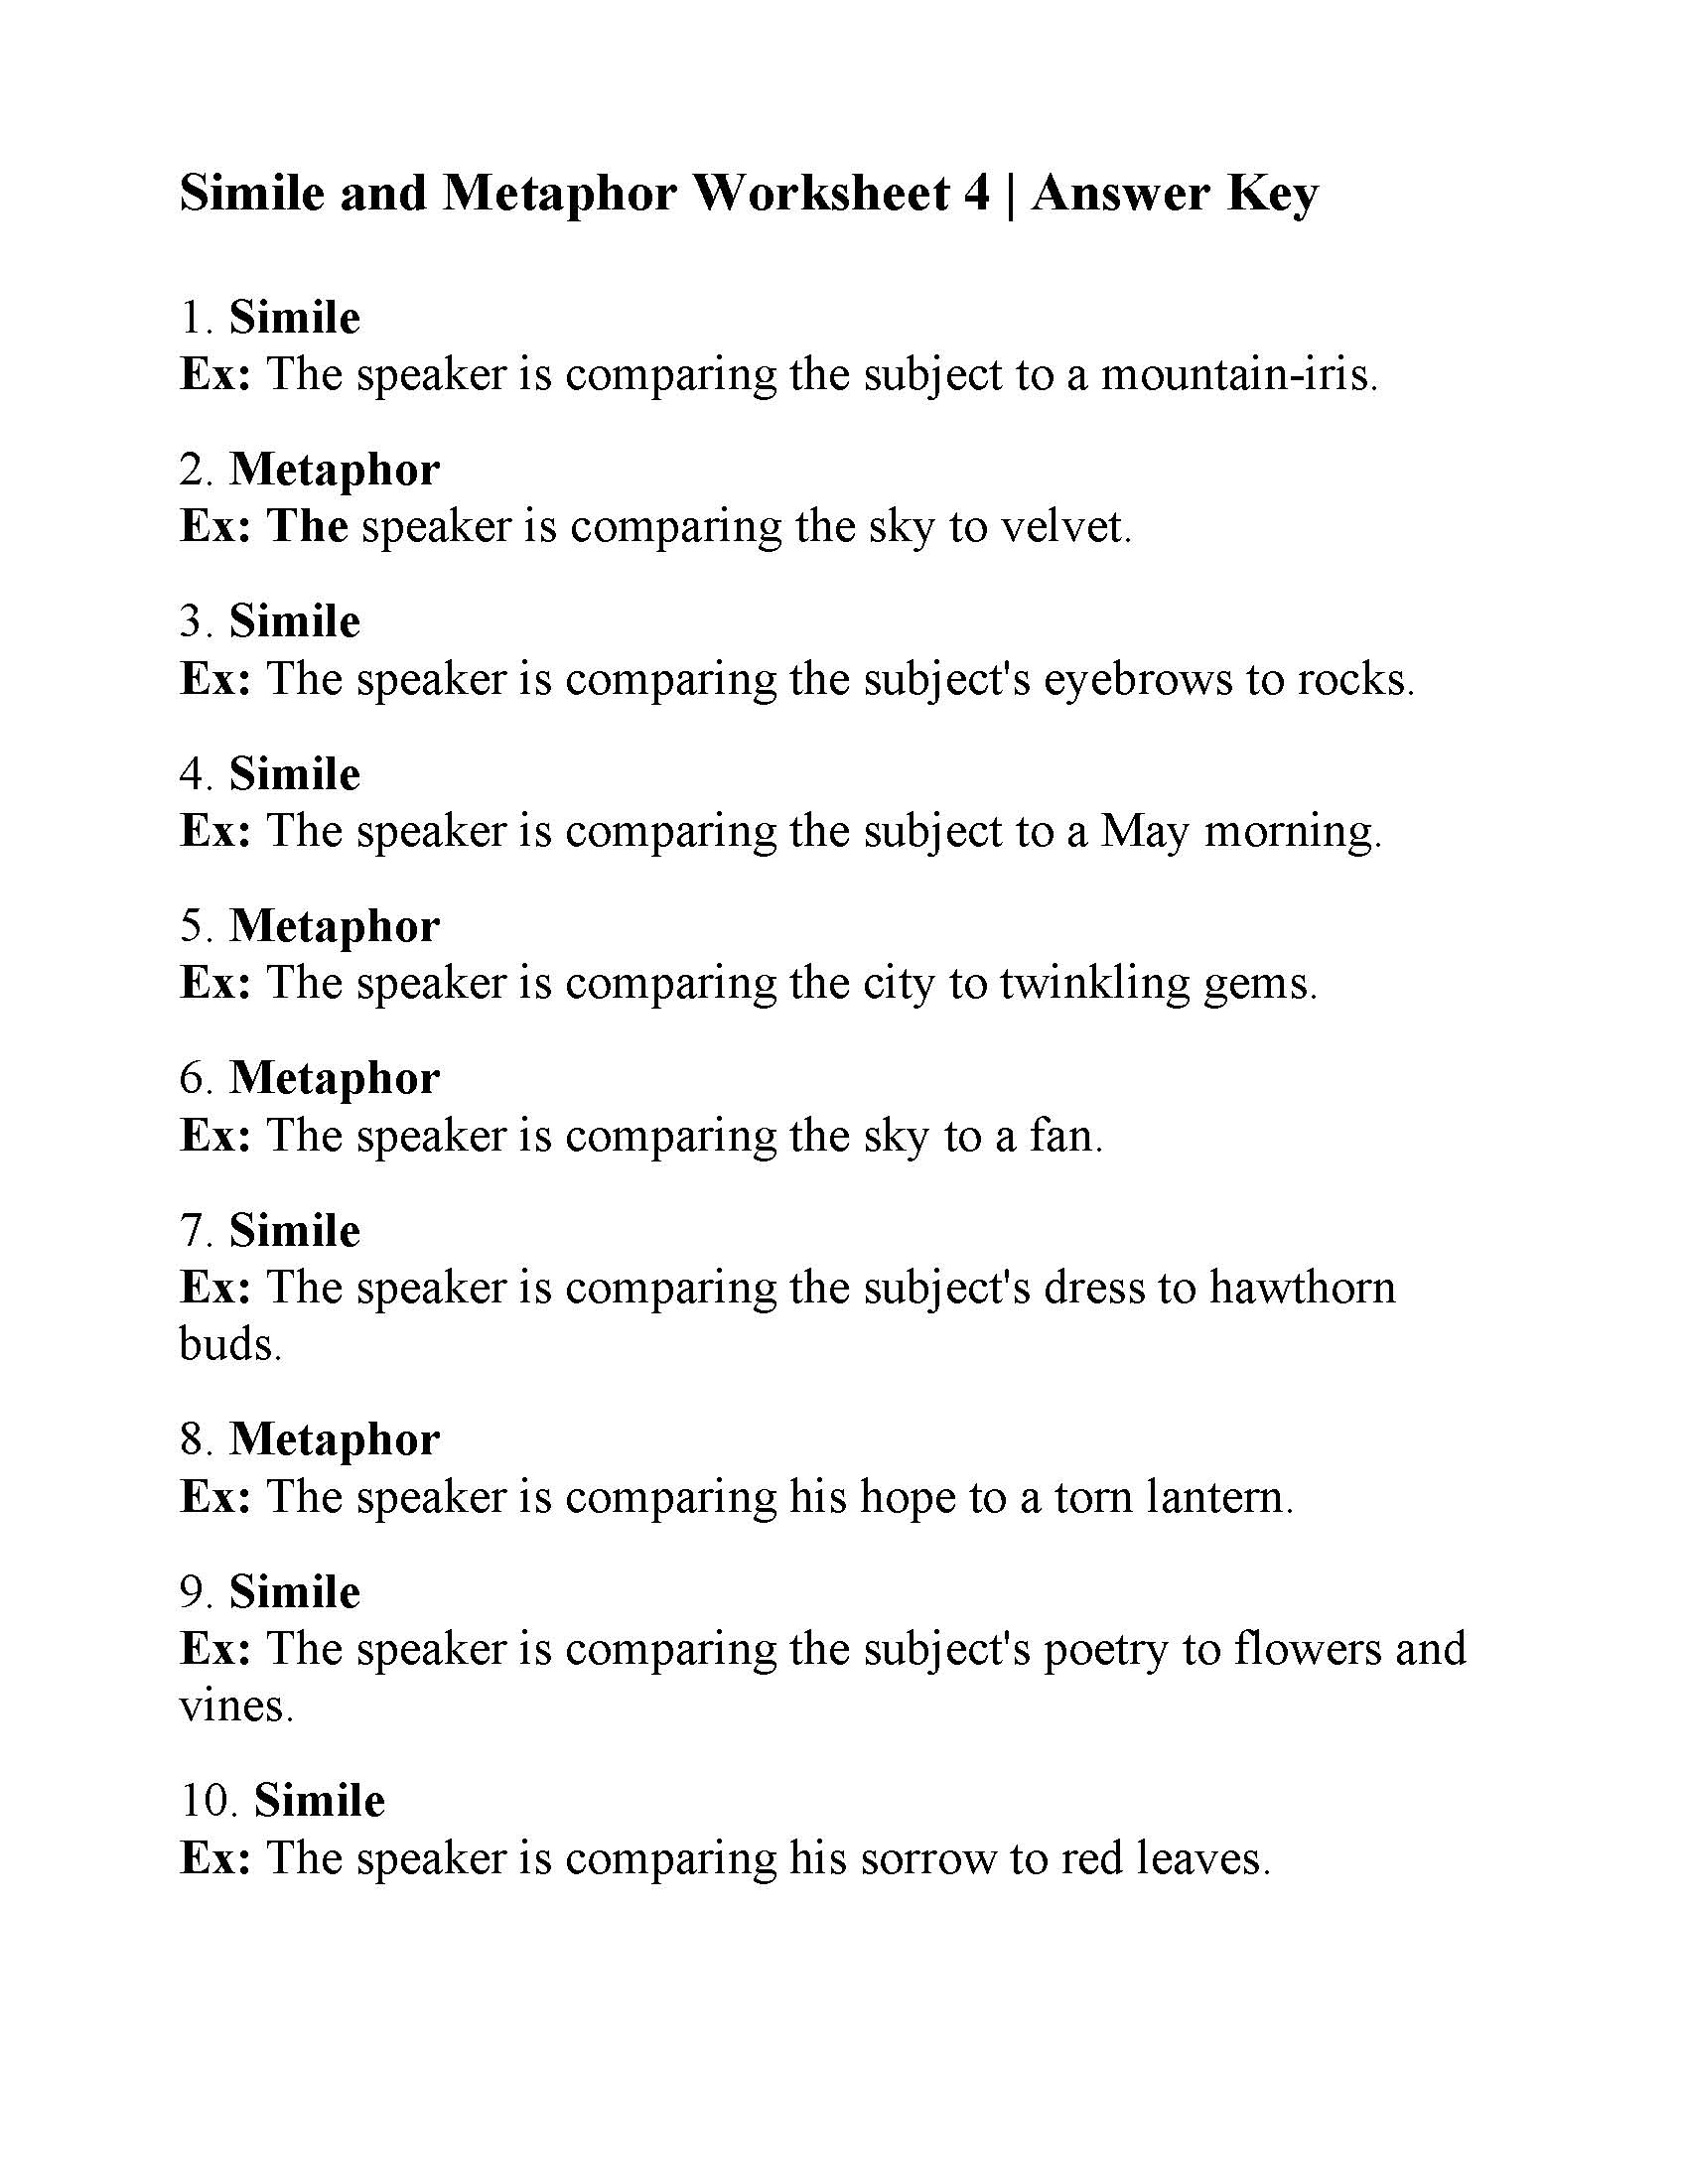 This is a preview image of Simile and Metaphor Worksheet 4. Click on it to enlarge it or view the source file.